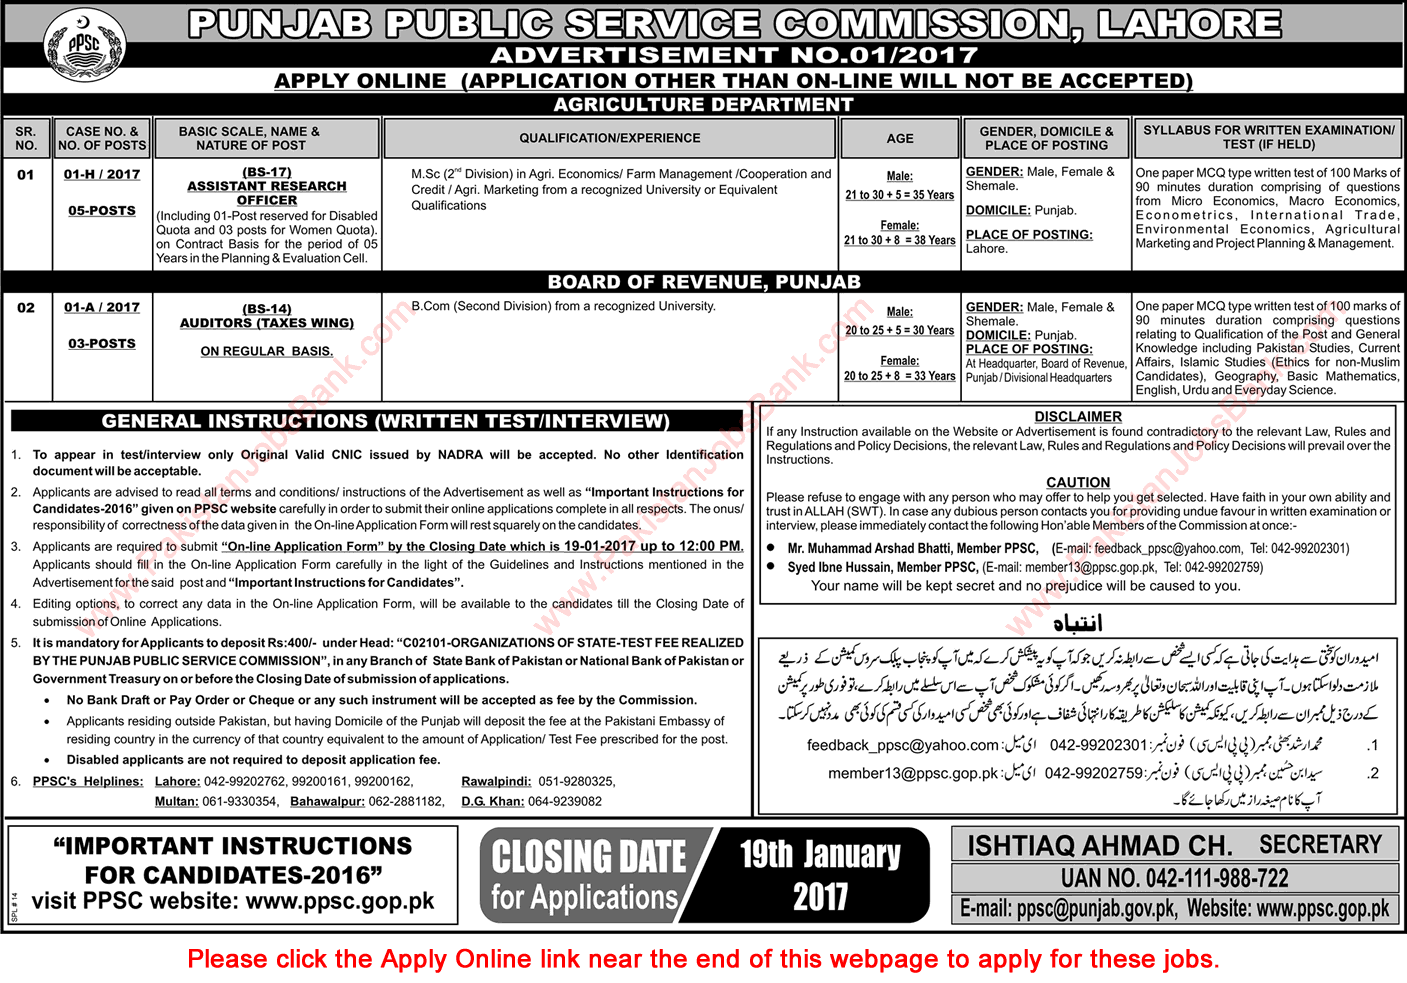 PPSC Jobs 2017 Consolidated Advertisement No 01/2017 1/2017 Apply Online Latest